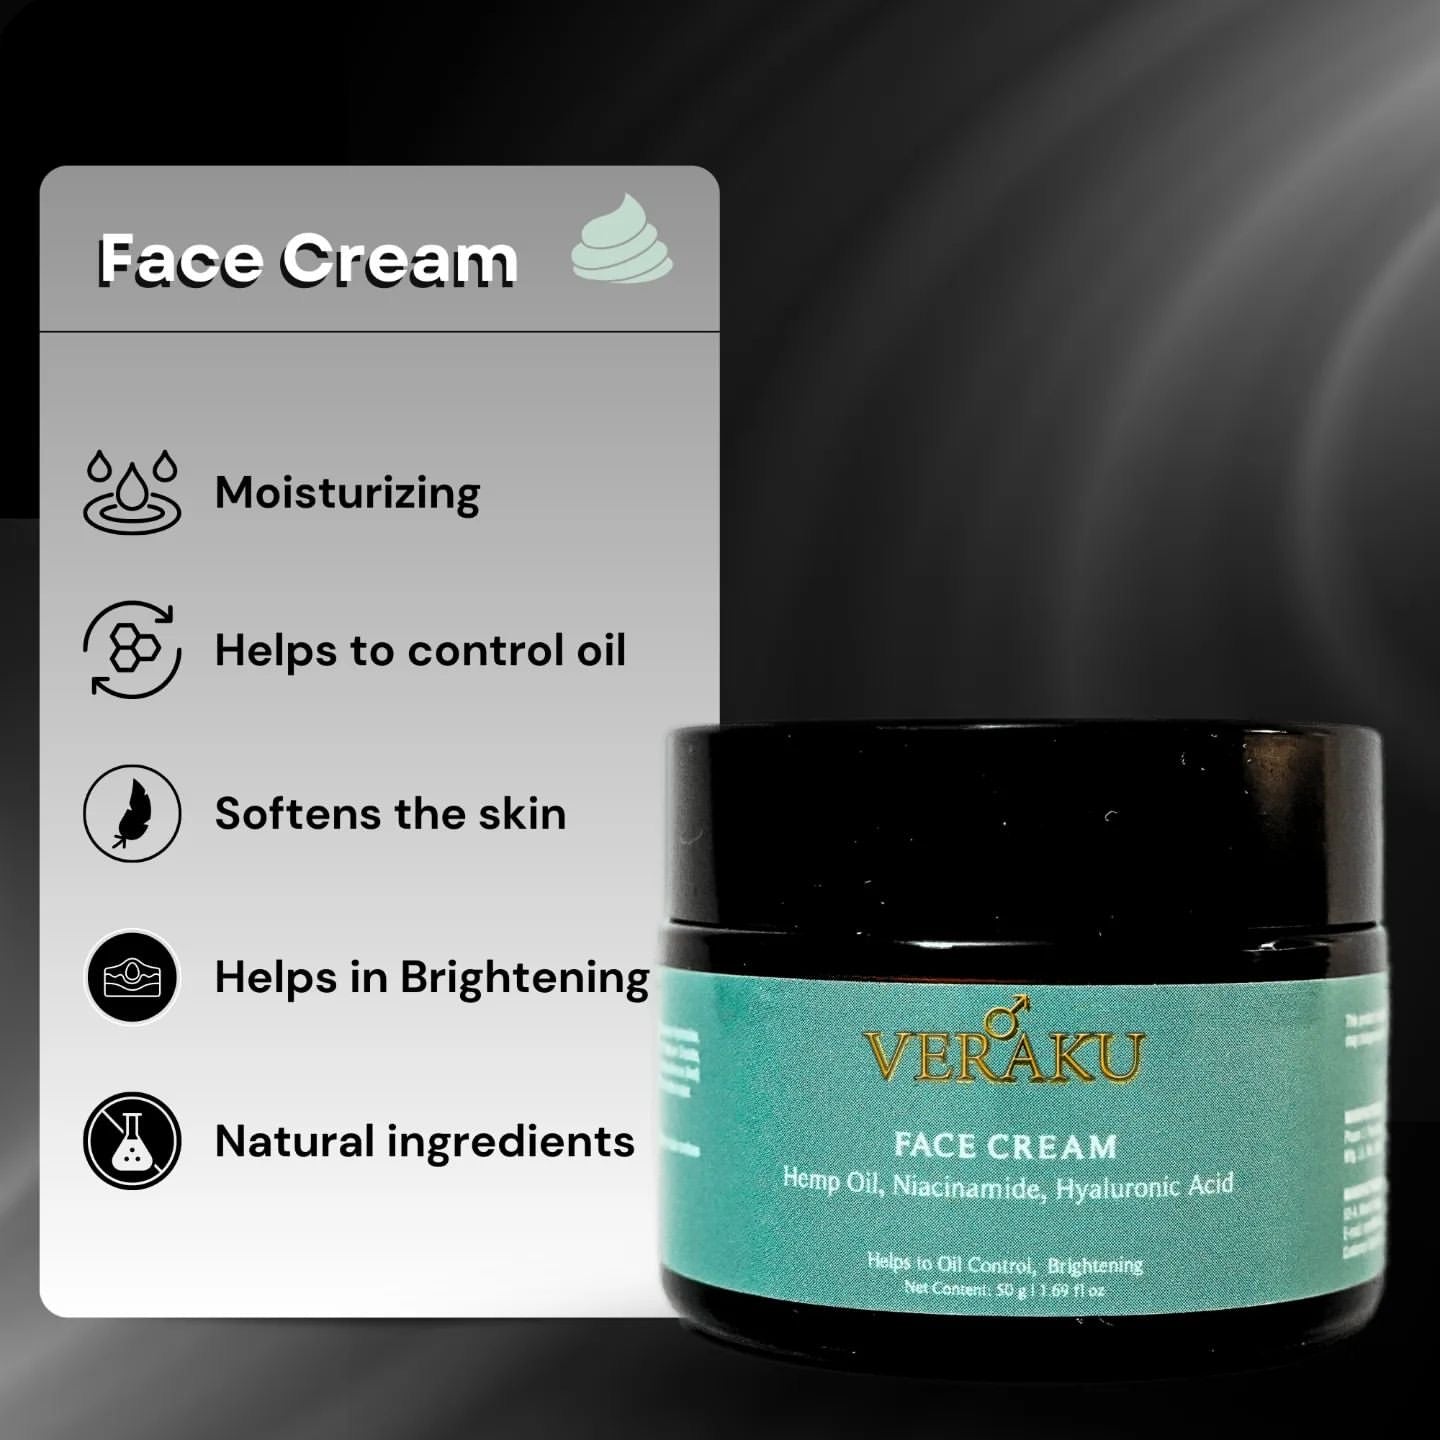 Coffee & Charcoal Face Mask | Skin Brightening Face Cream | COMBO PACK | For Men - Veraku